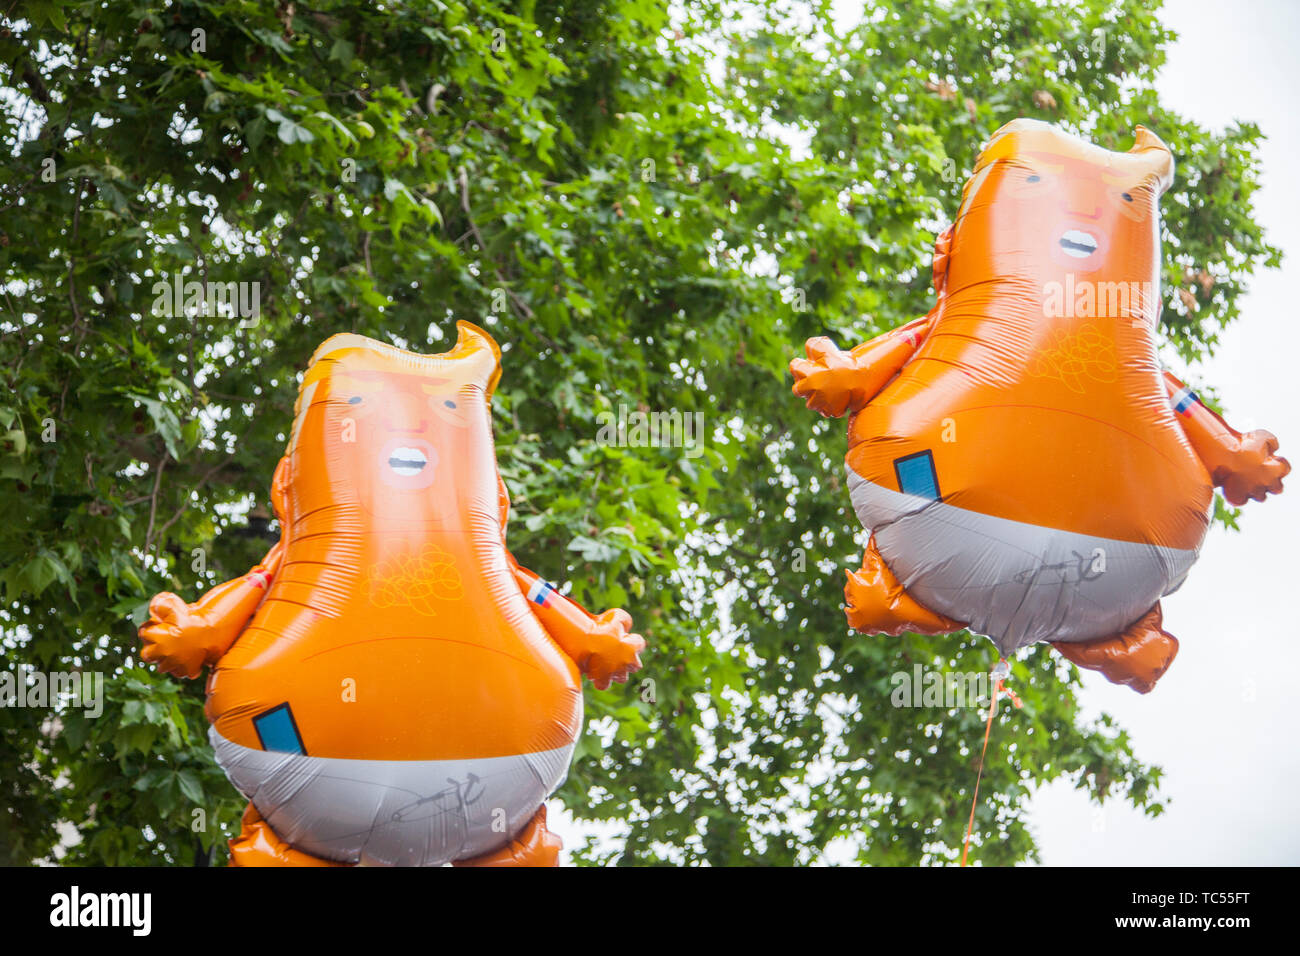 LONDON, UK - June 4th, 2019: Baby Donald Trump helium balloons during an Anti Trump rally in Central London Stock Photo